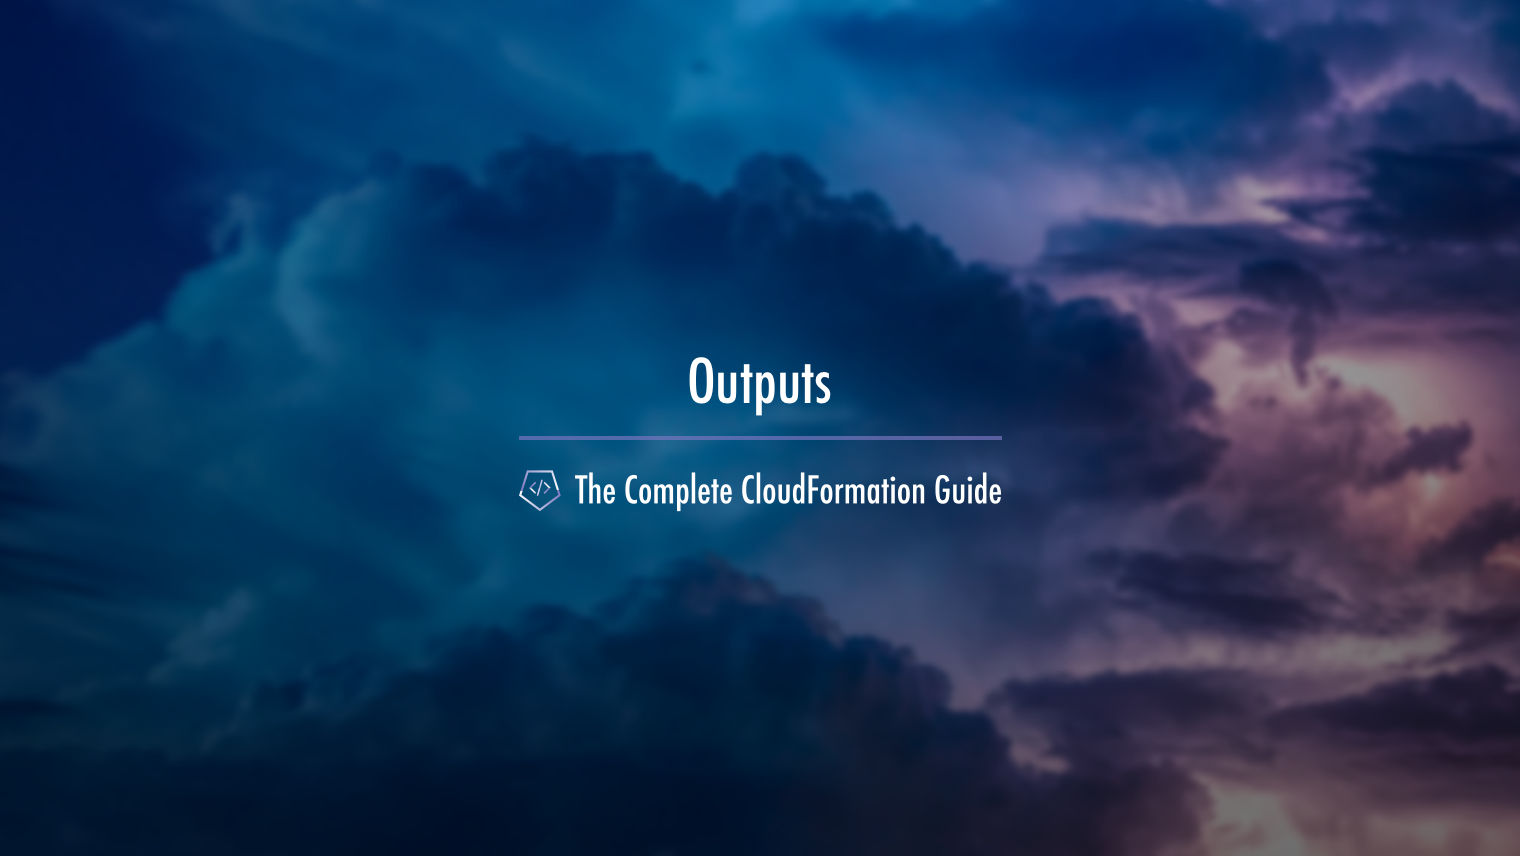 The Complete CloudFormation Guide Outputs